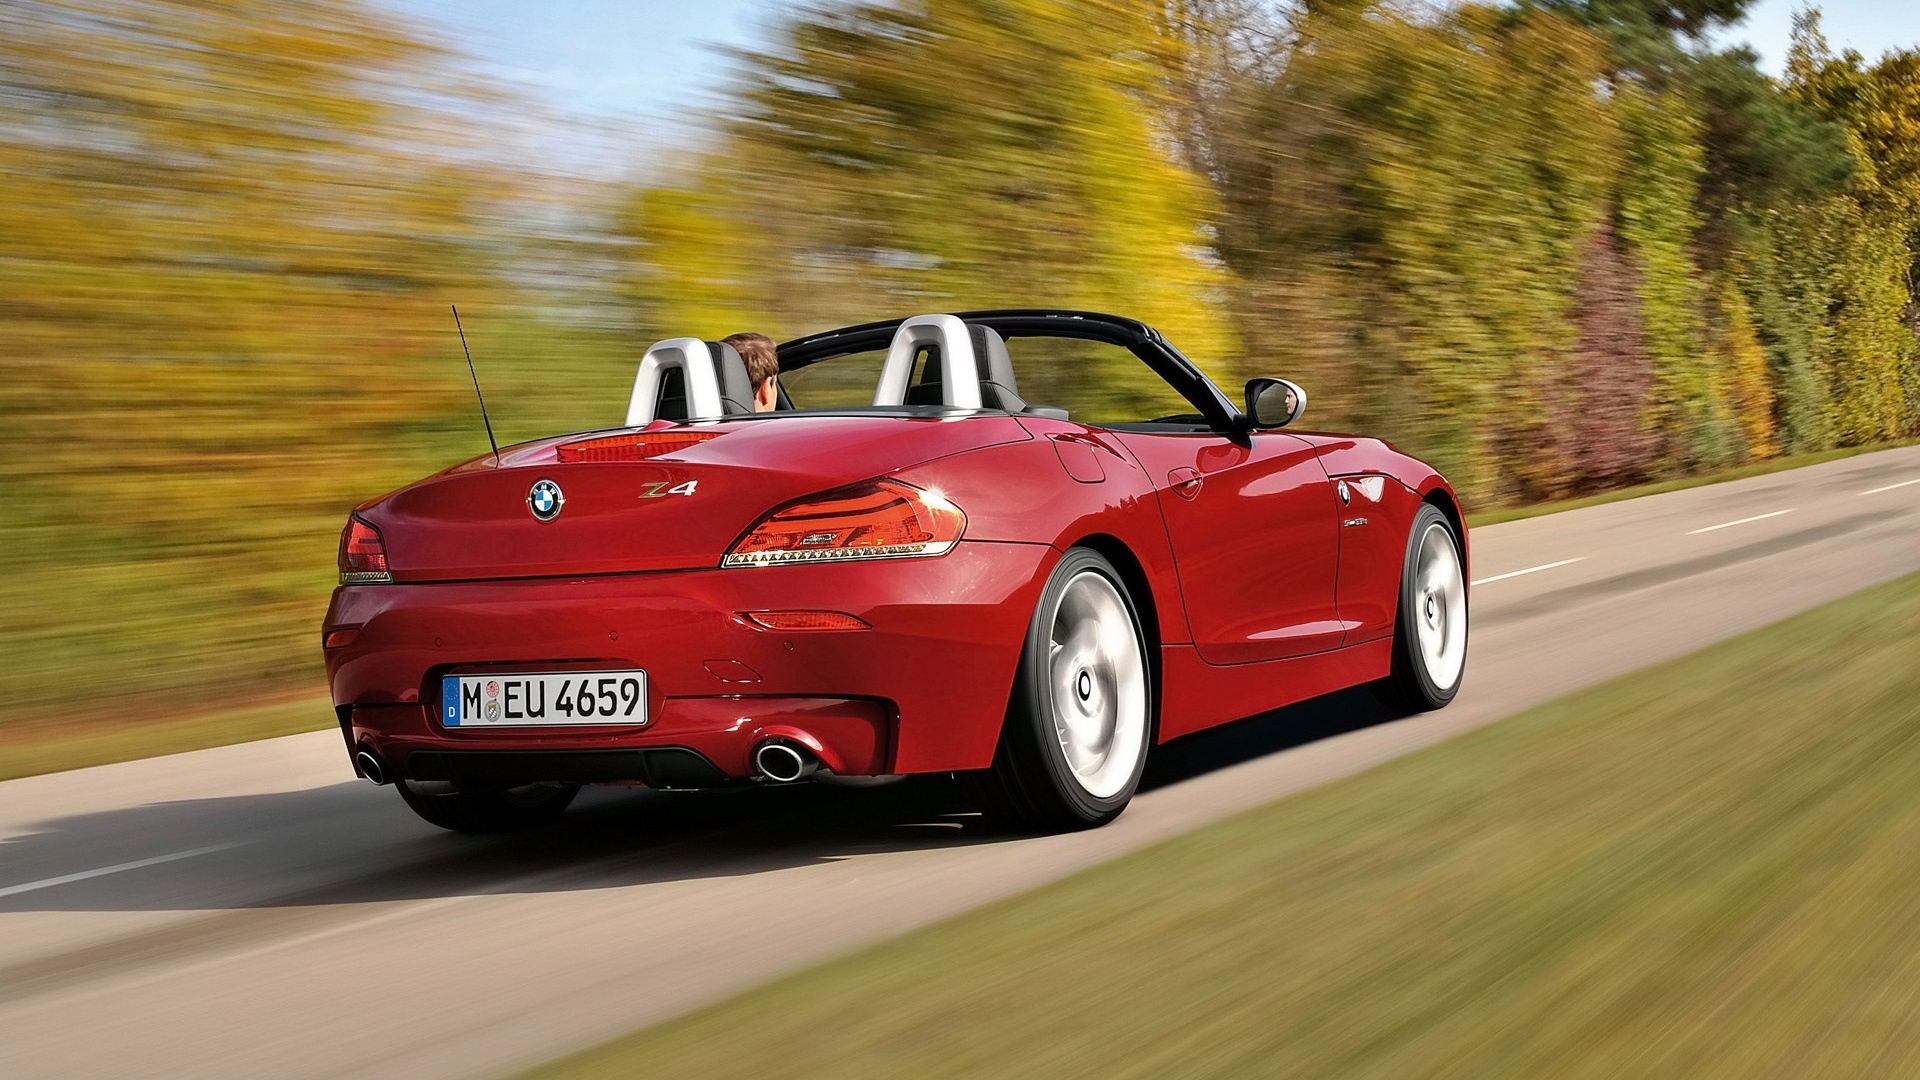 BMW Z4 sDrive35is Rear 2010 for 1920 x 1080 HDTV 1080p resolution